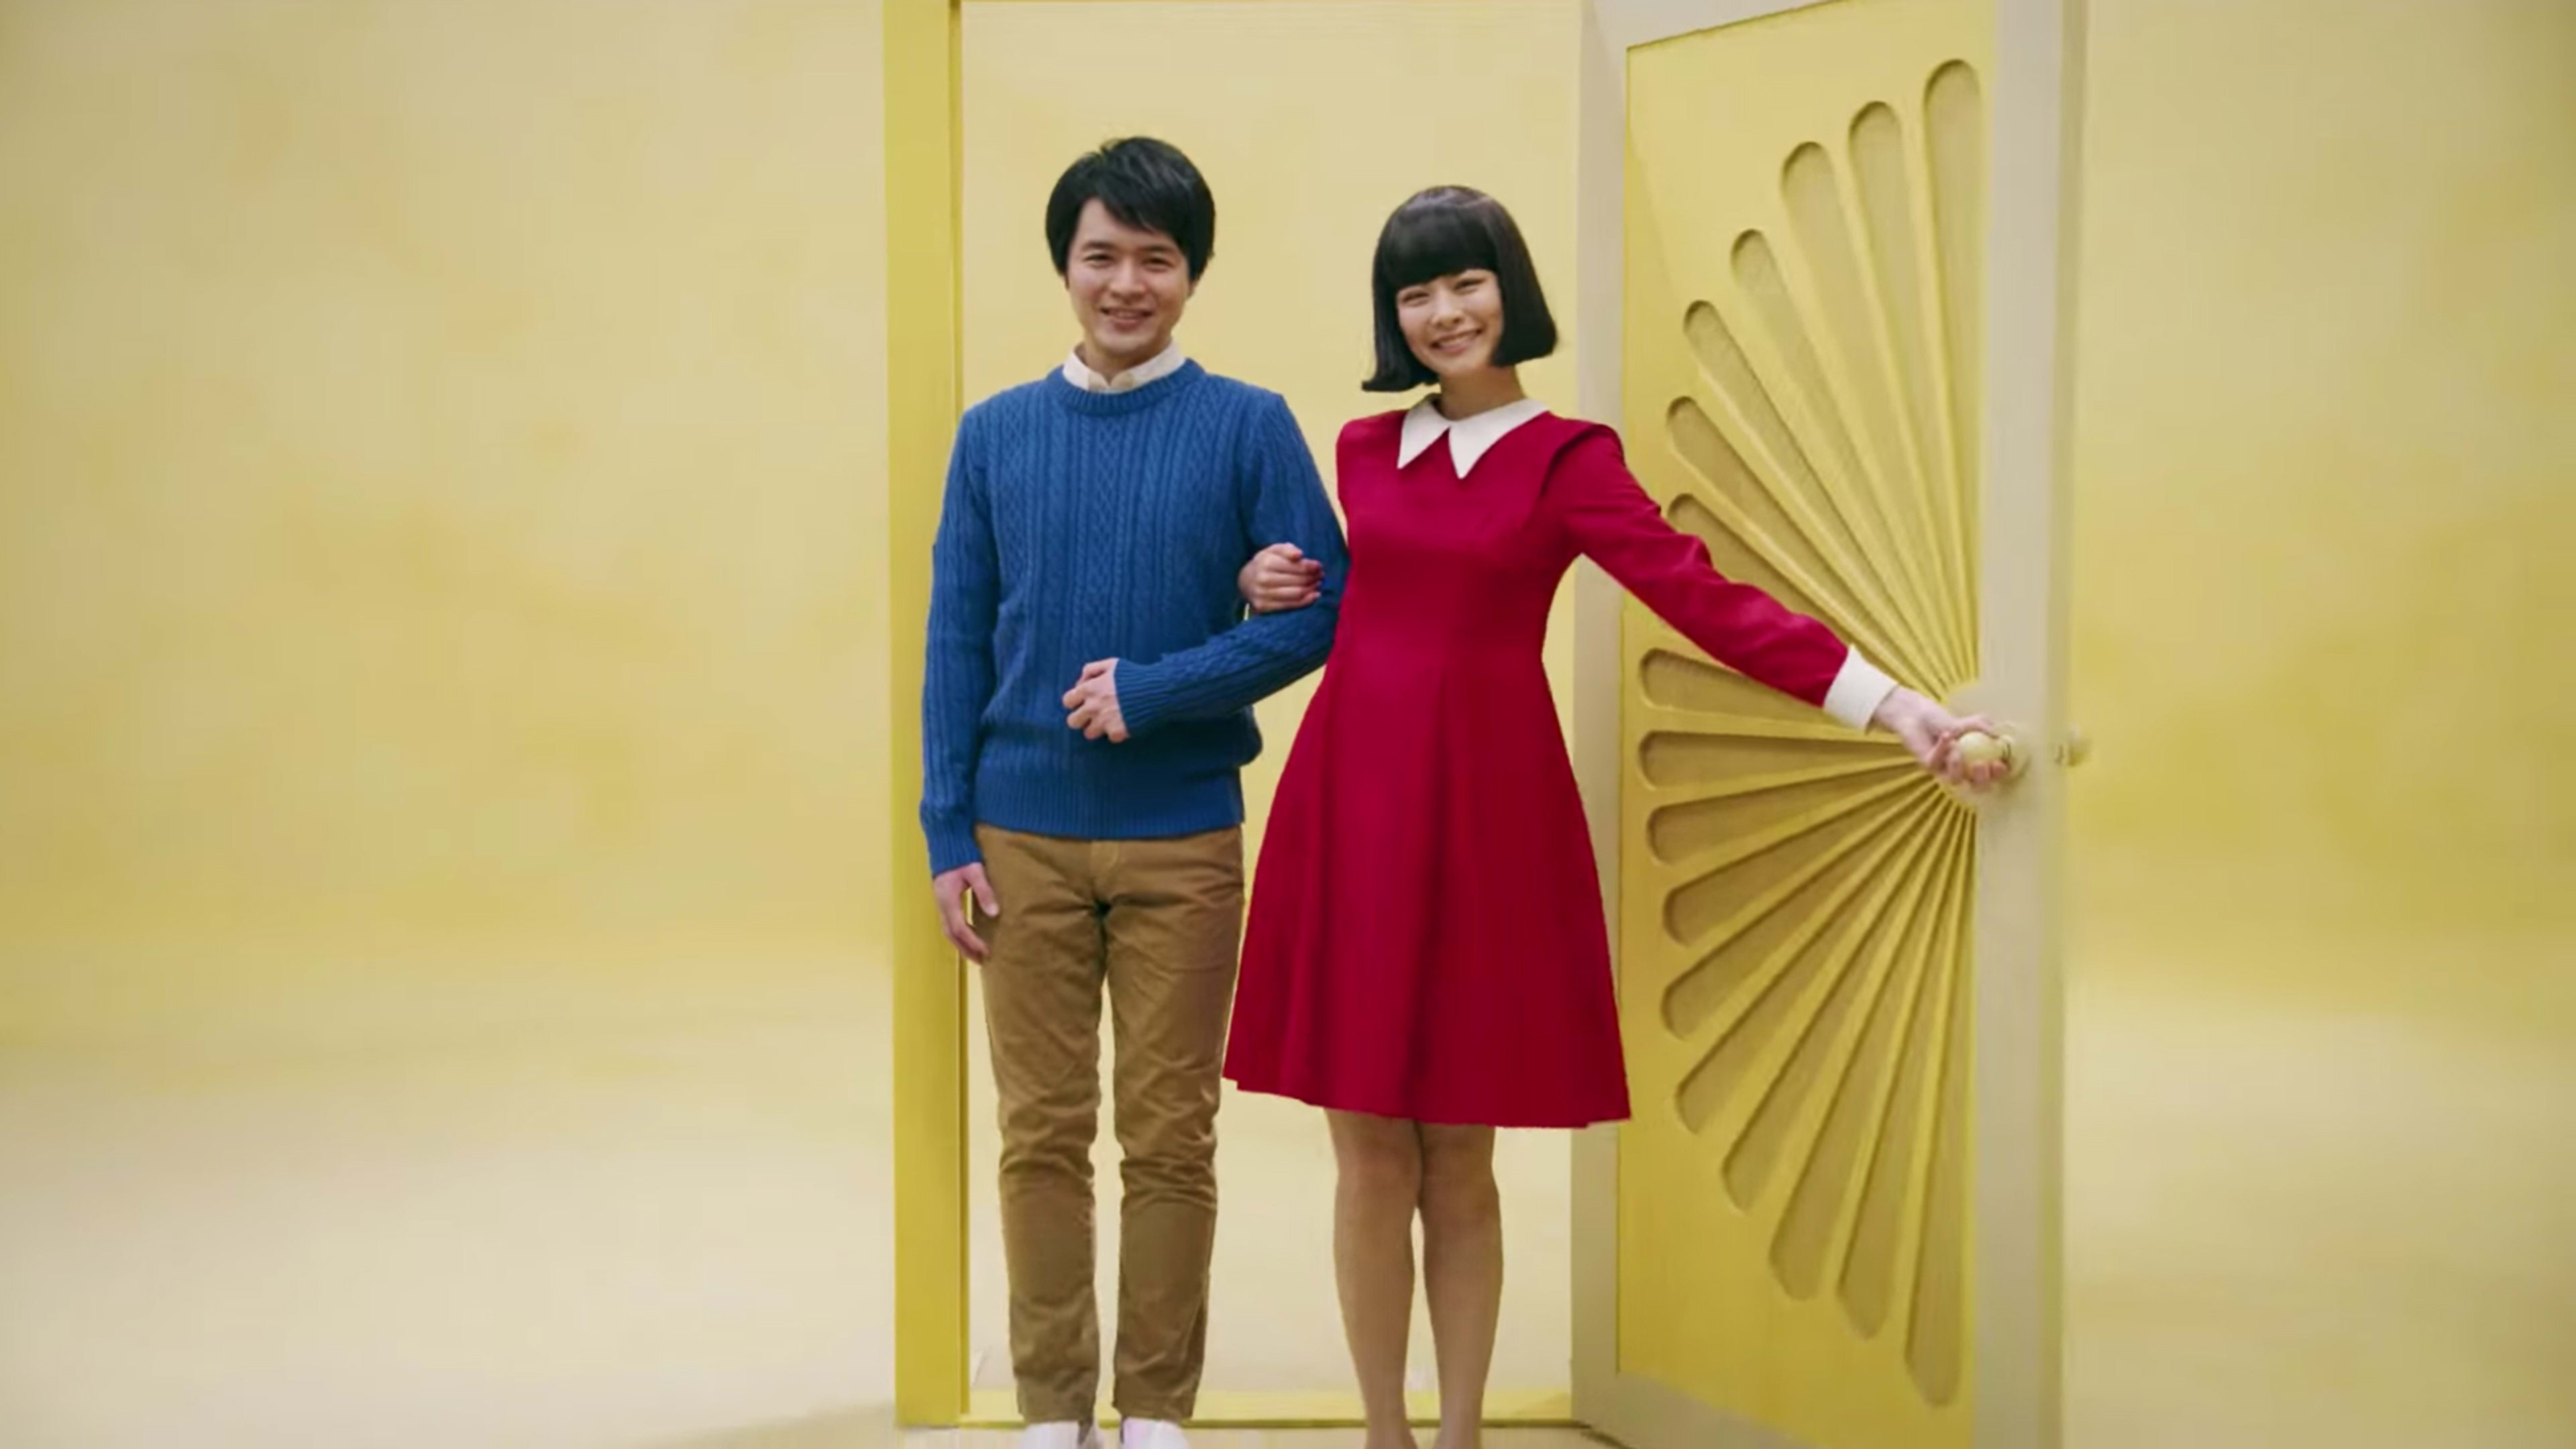 72 Actors Play The Same Role In This Bittersweet Japanese Ad